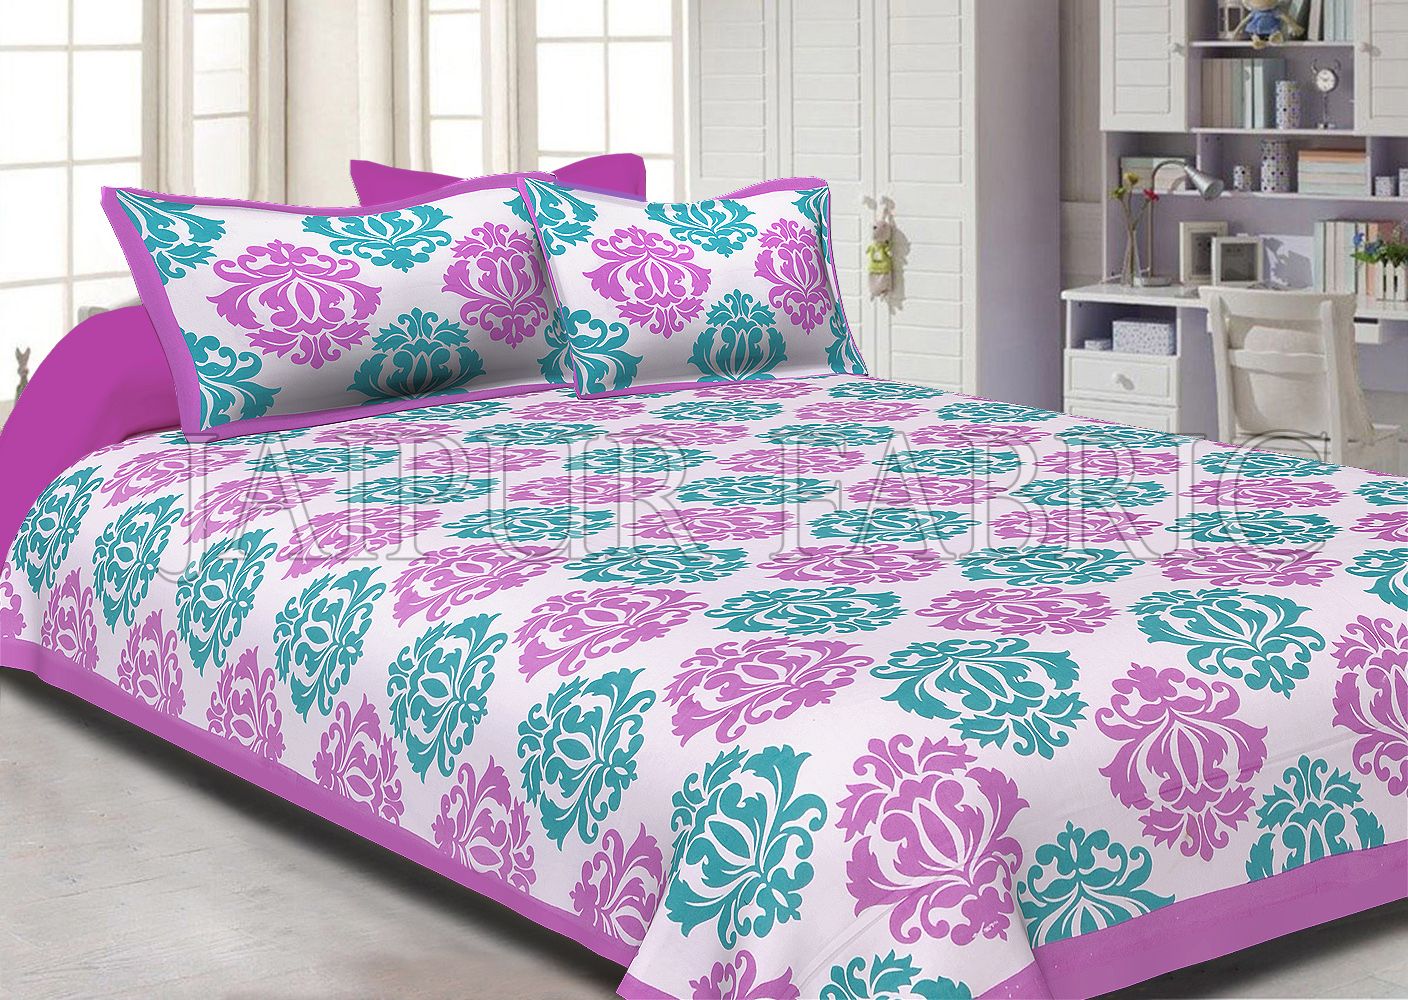 Violet boarder cream base with floral pattern double bed sheet